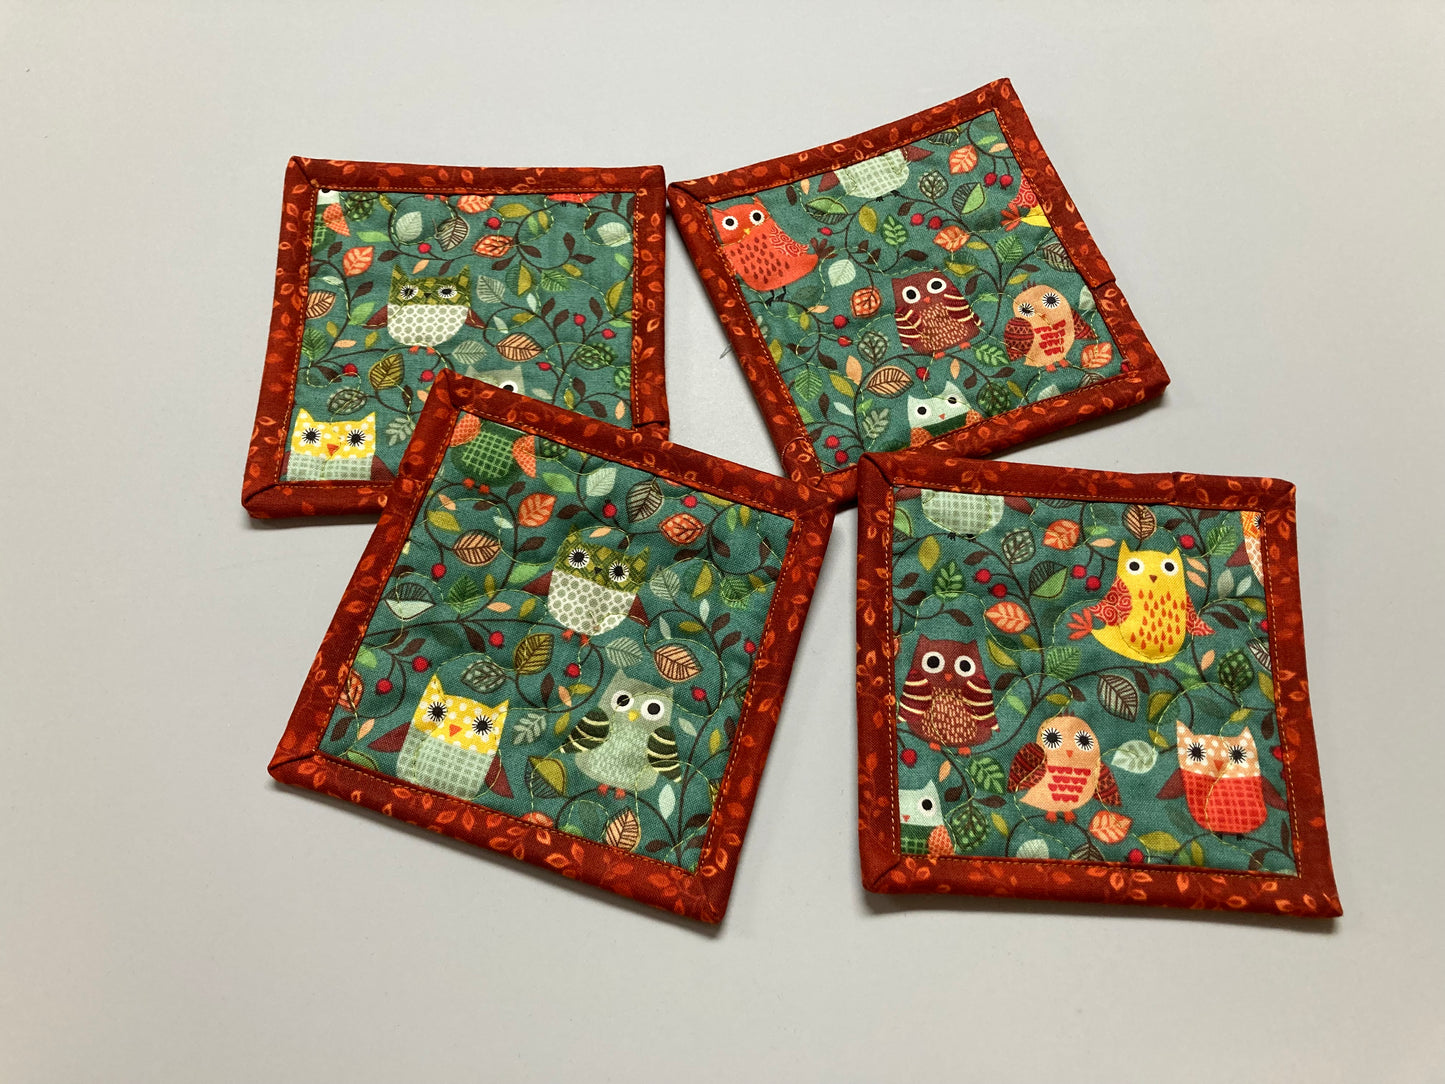 Owl Woodland Animal Fabric Coasters for Drinks, 5x5" Large Coffee Tea Beer Hot Cold Washable Reusable Kid’s Snack Mats, Forest Handmade